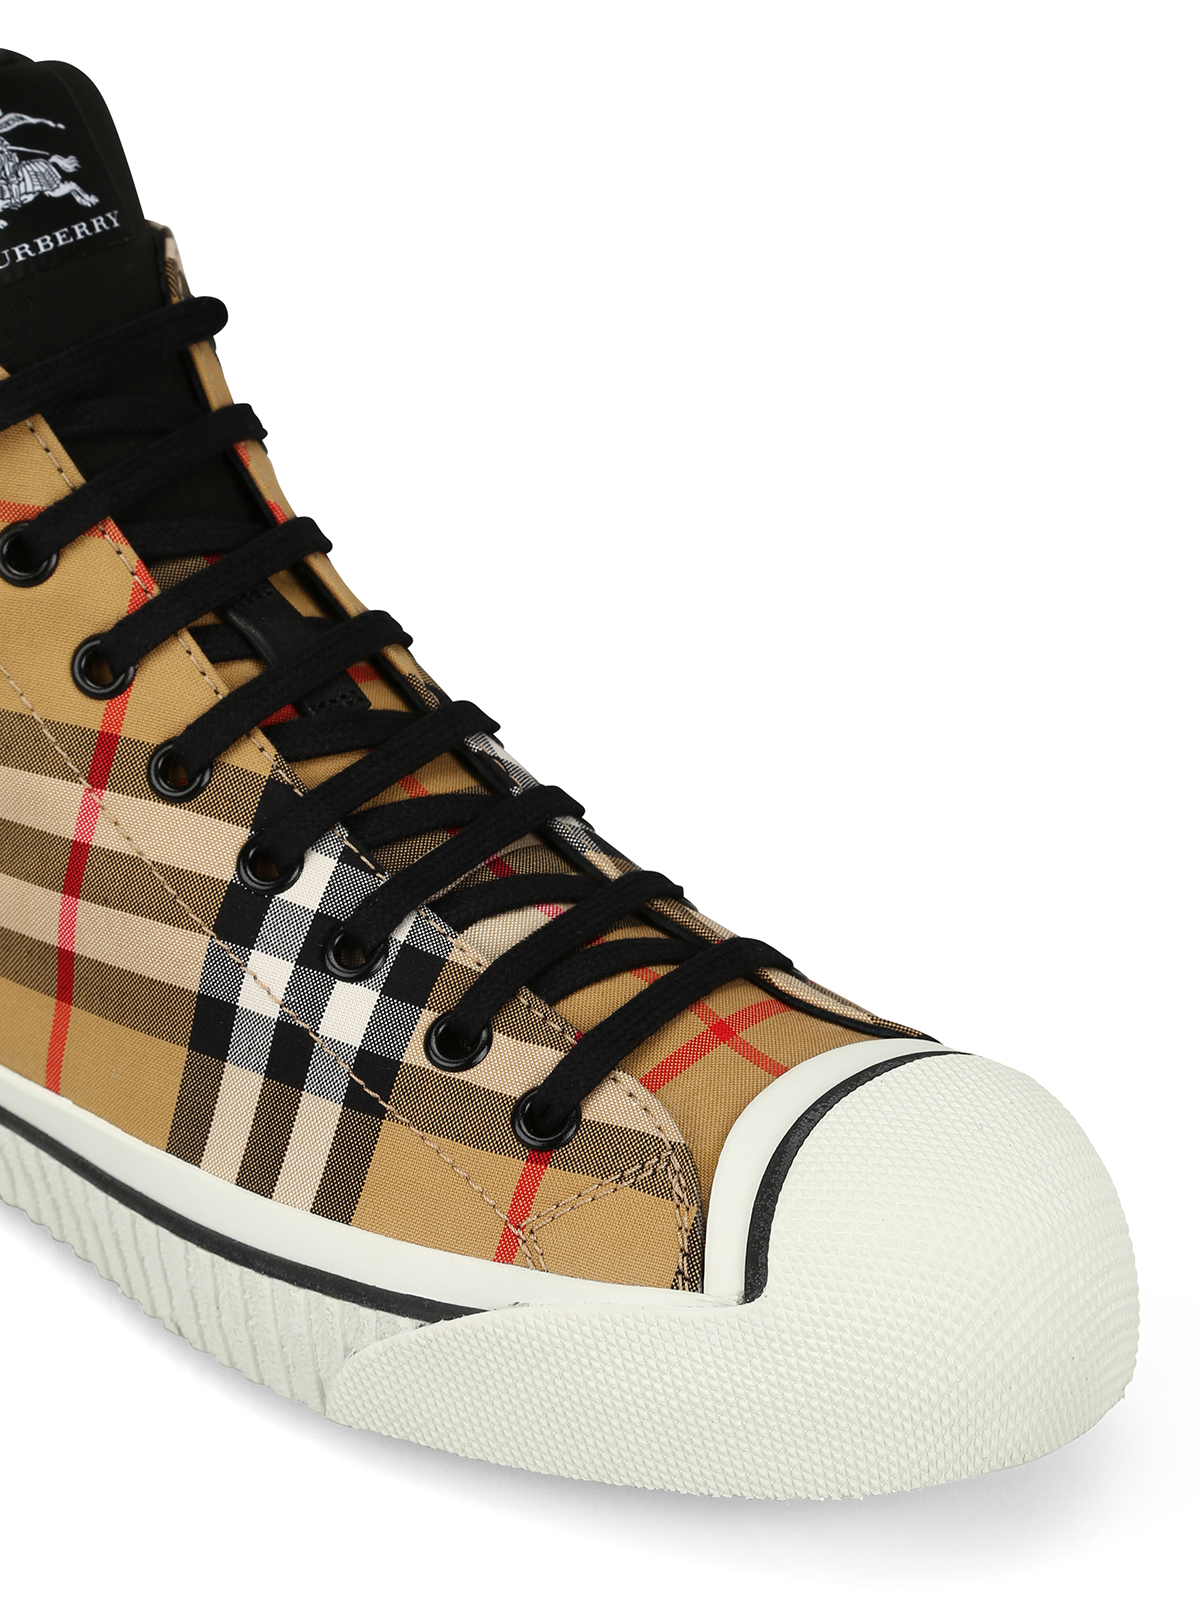 burberry high top sneakers